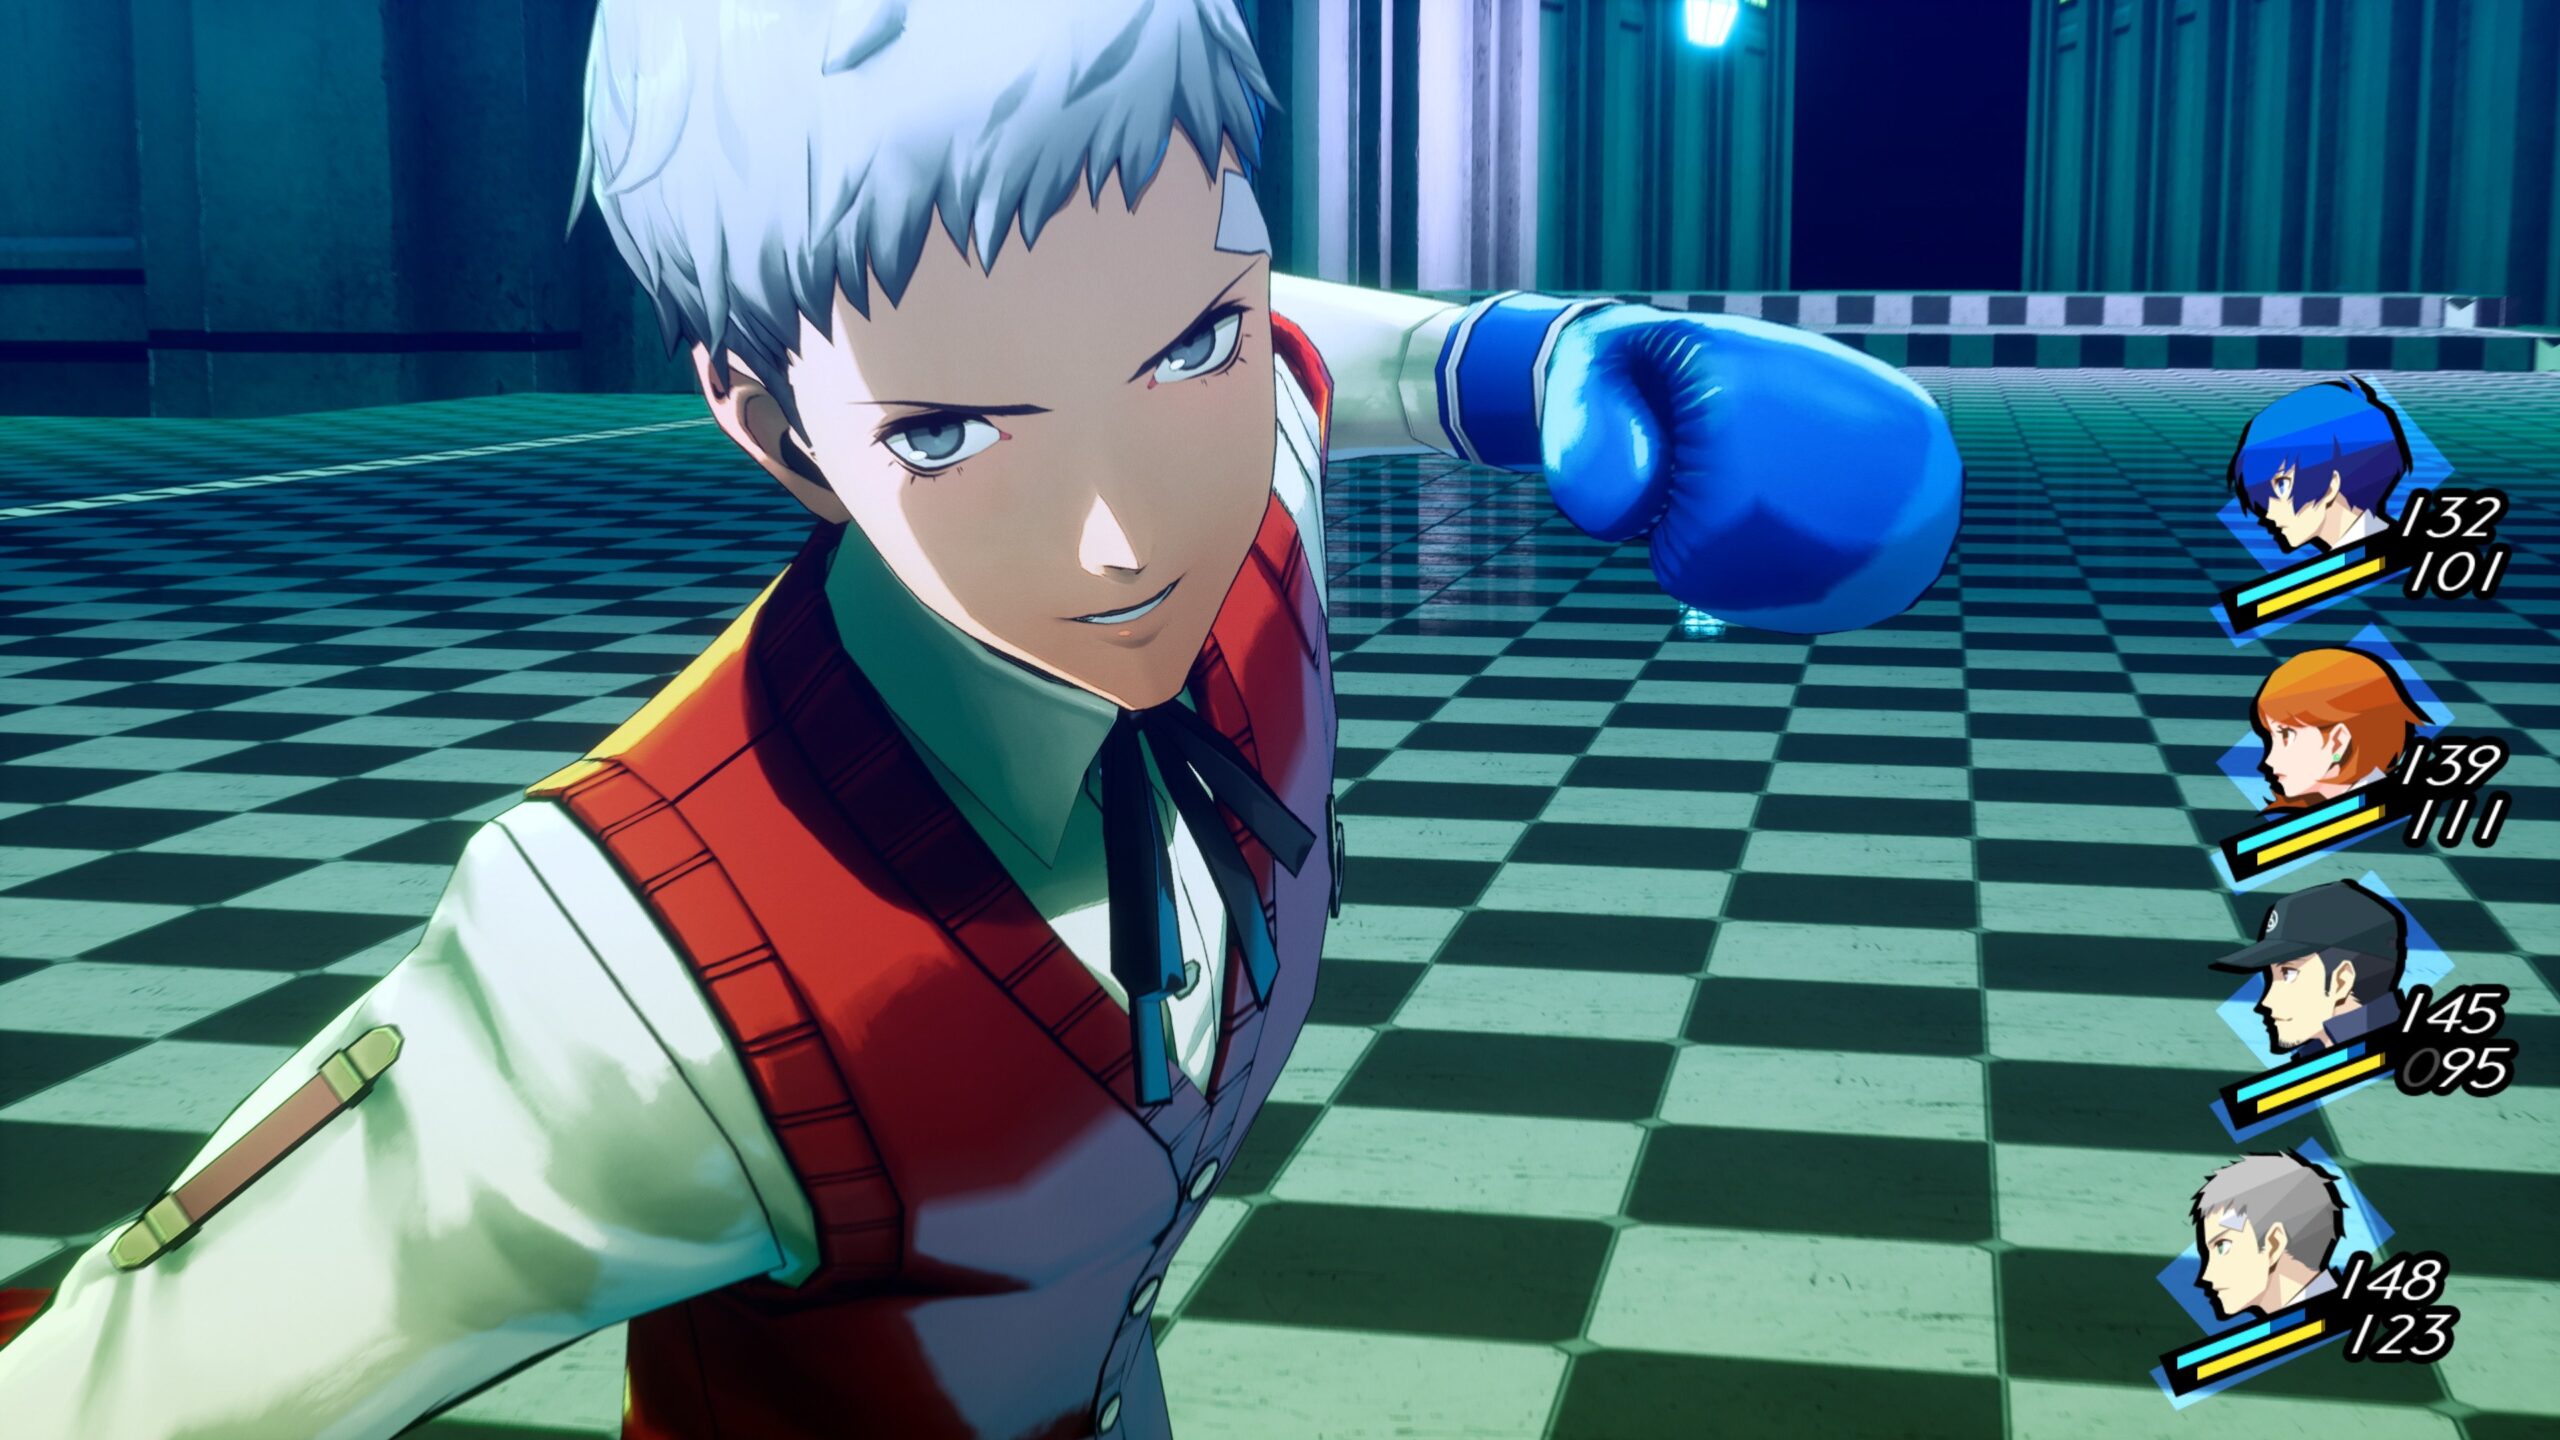 Persona 3 Reload Sales Surpass One Million Units in First Week